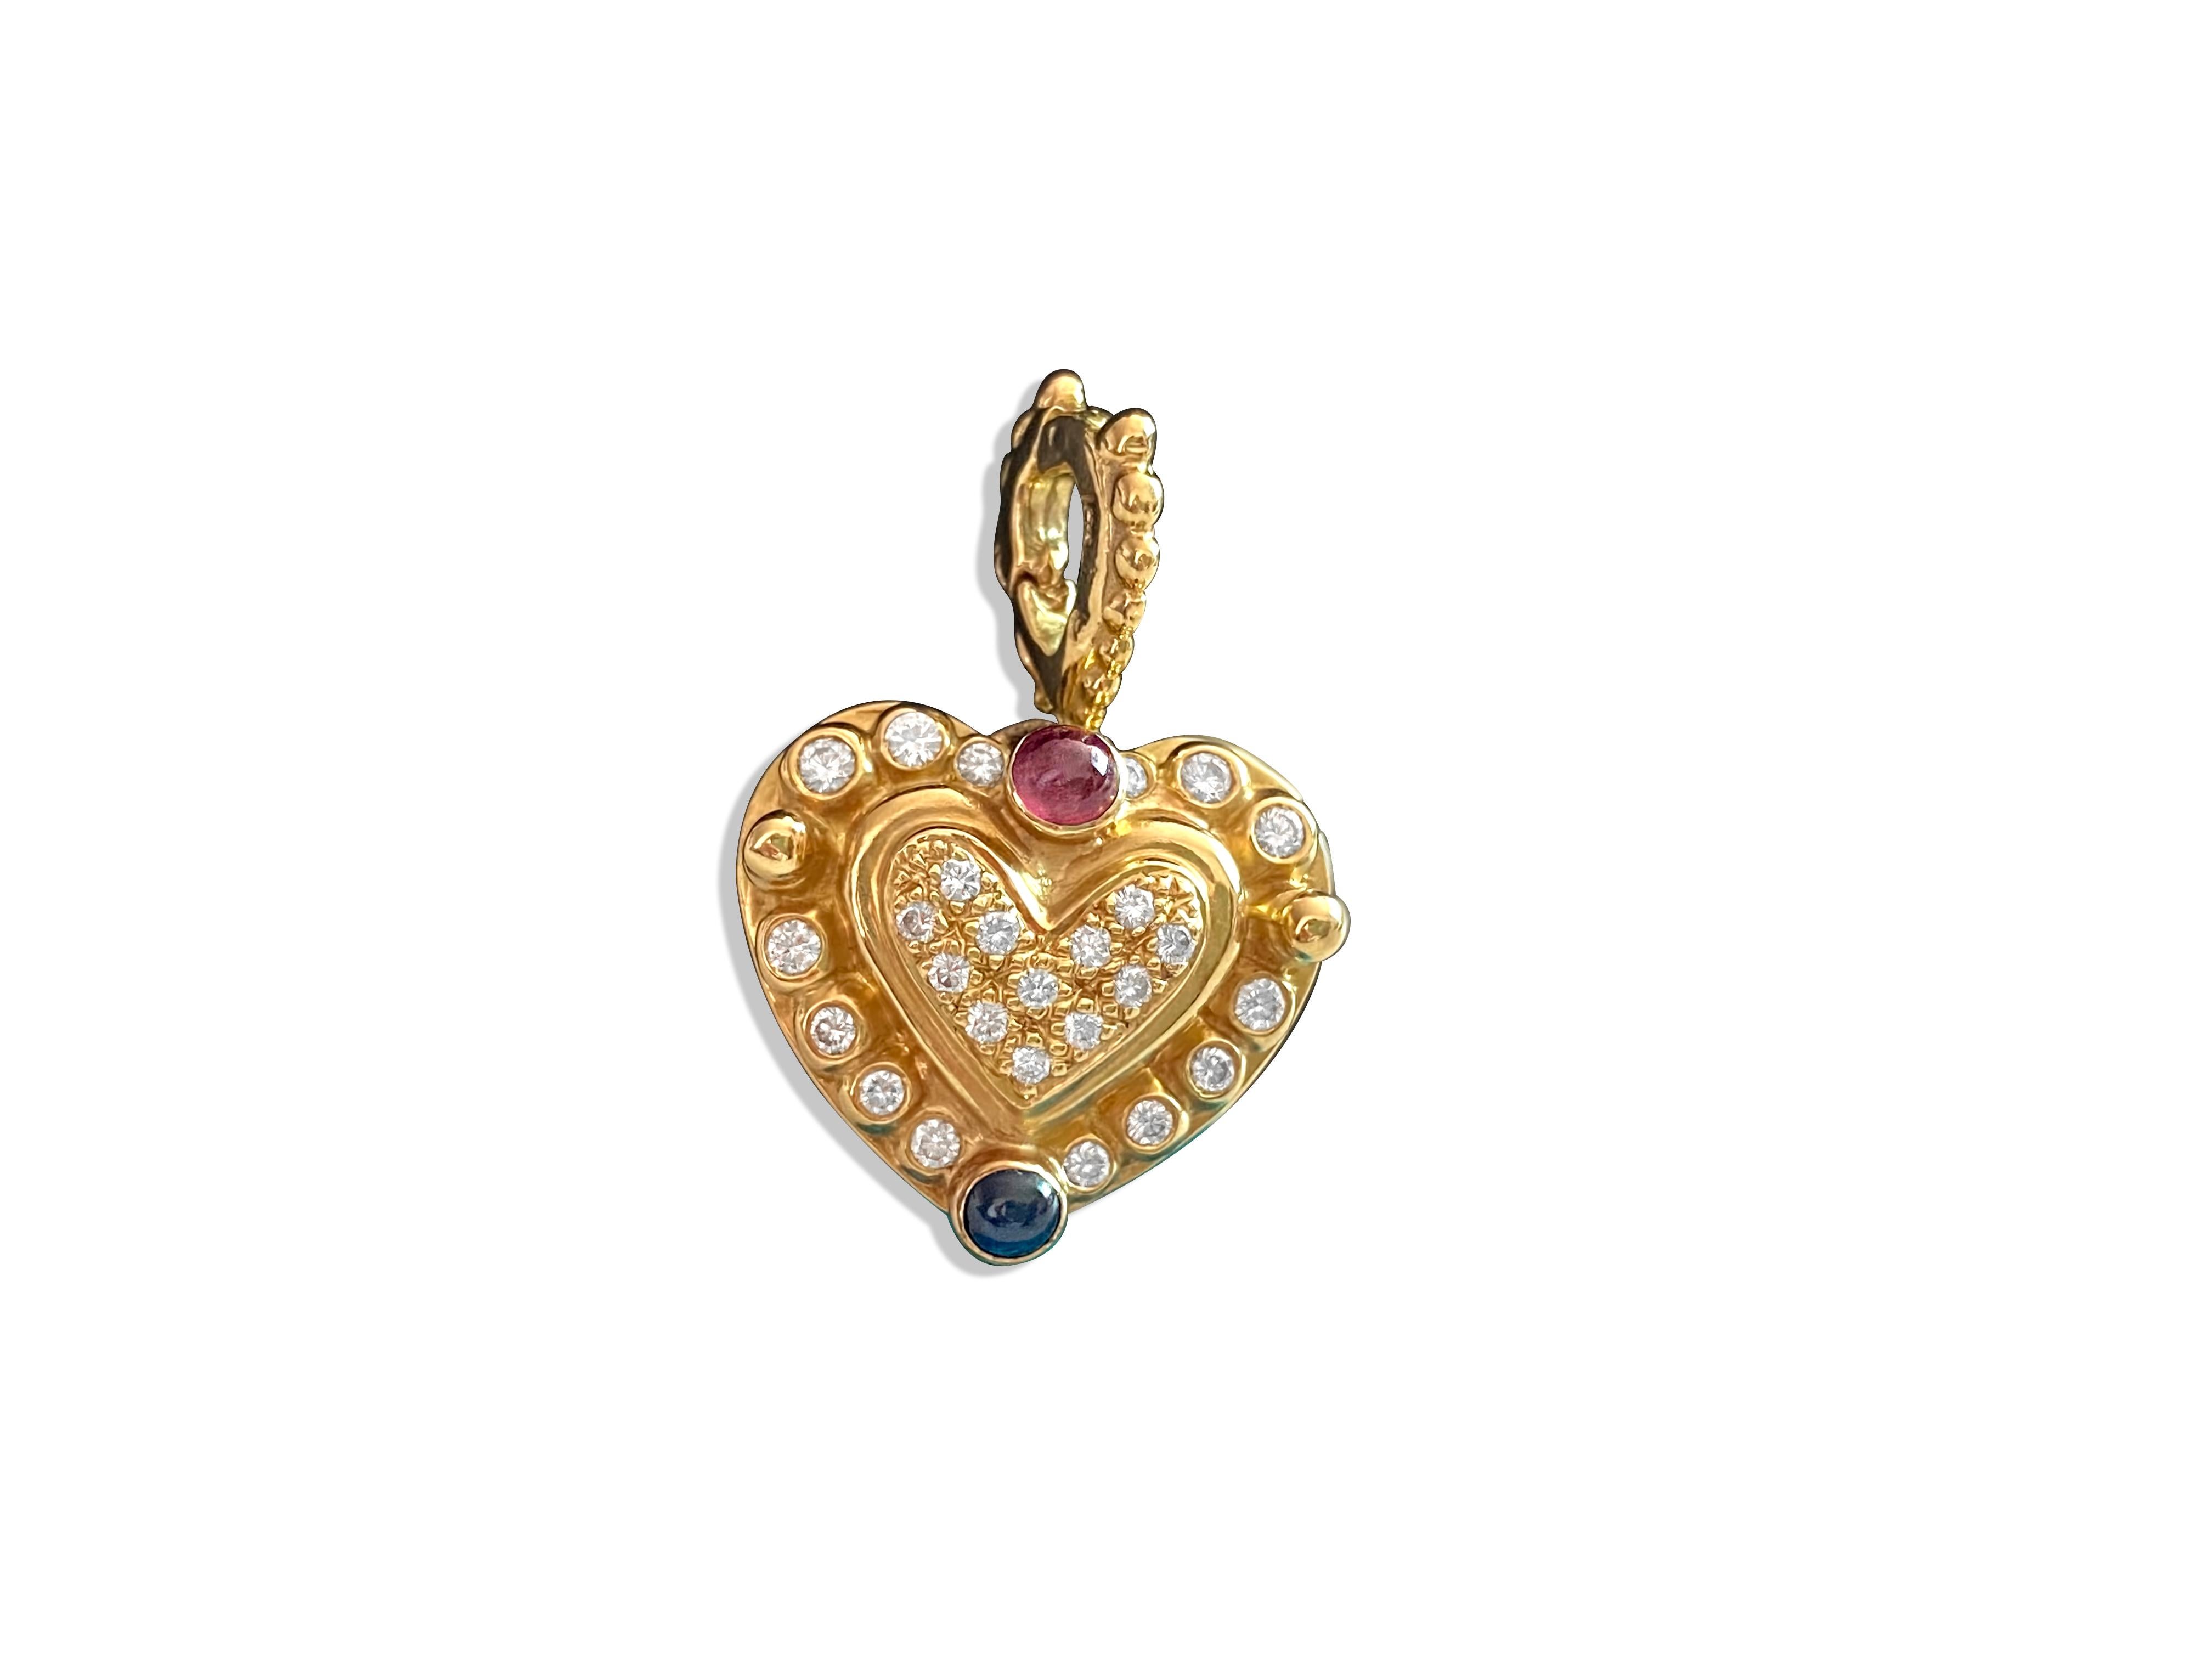 Metal: 18K yellow gold.

Diamonds: 0.75cwt. VVS clarity and F color. Round brilliant cut. 
0.50cwt of blue sapphire and ruby. Cabochon cut. 

All gemstones and diamonds are 100% natural earth mined. 

Weight: 16 grams gold.

A very unique and